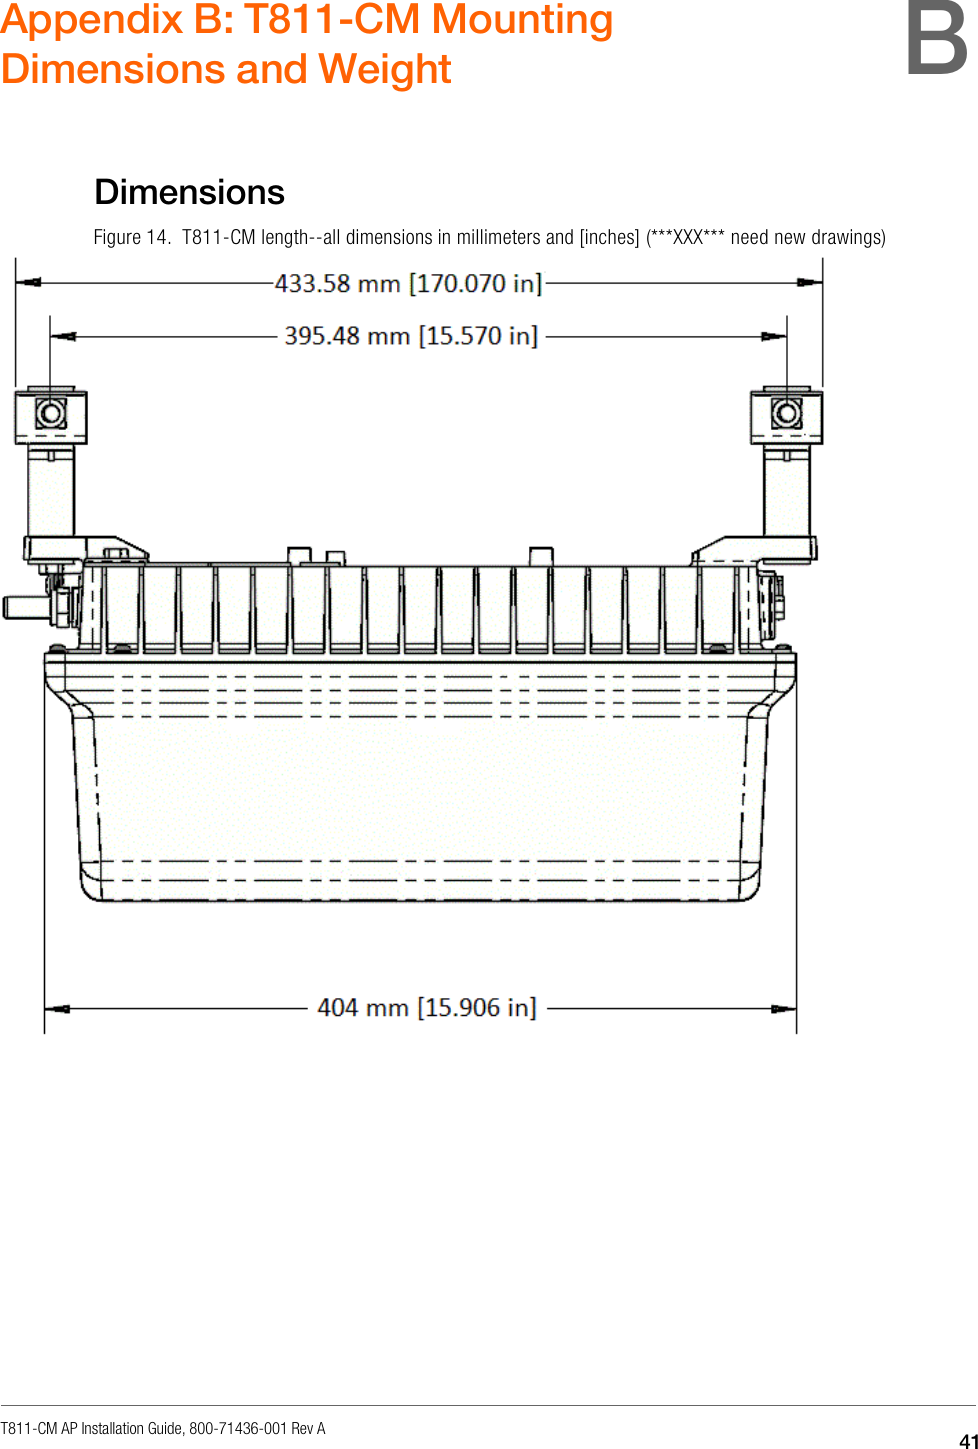 T811-CM AP Installation Guide, 800-71436-001 Rev A  41   Appendix B: T811-CM Mounting Dimensions and Weight  Dimensions Figure 14.  T811-CM length--all dimensions in millimeters and [inches] (***XXX*** need new drawings)                   B 